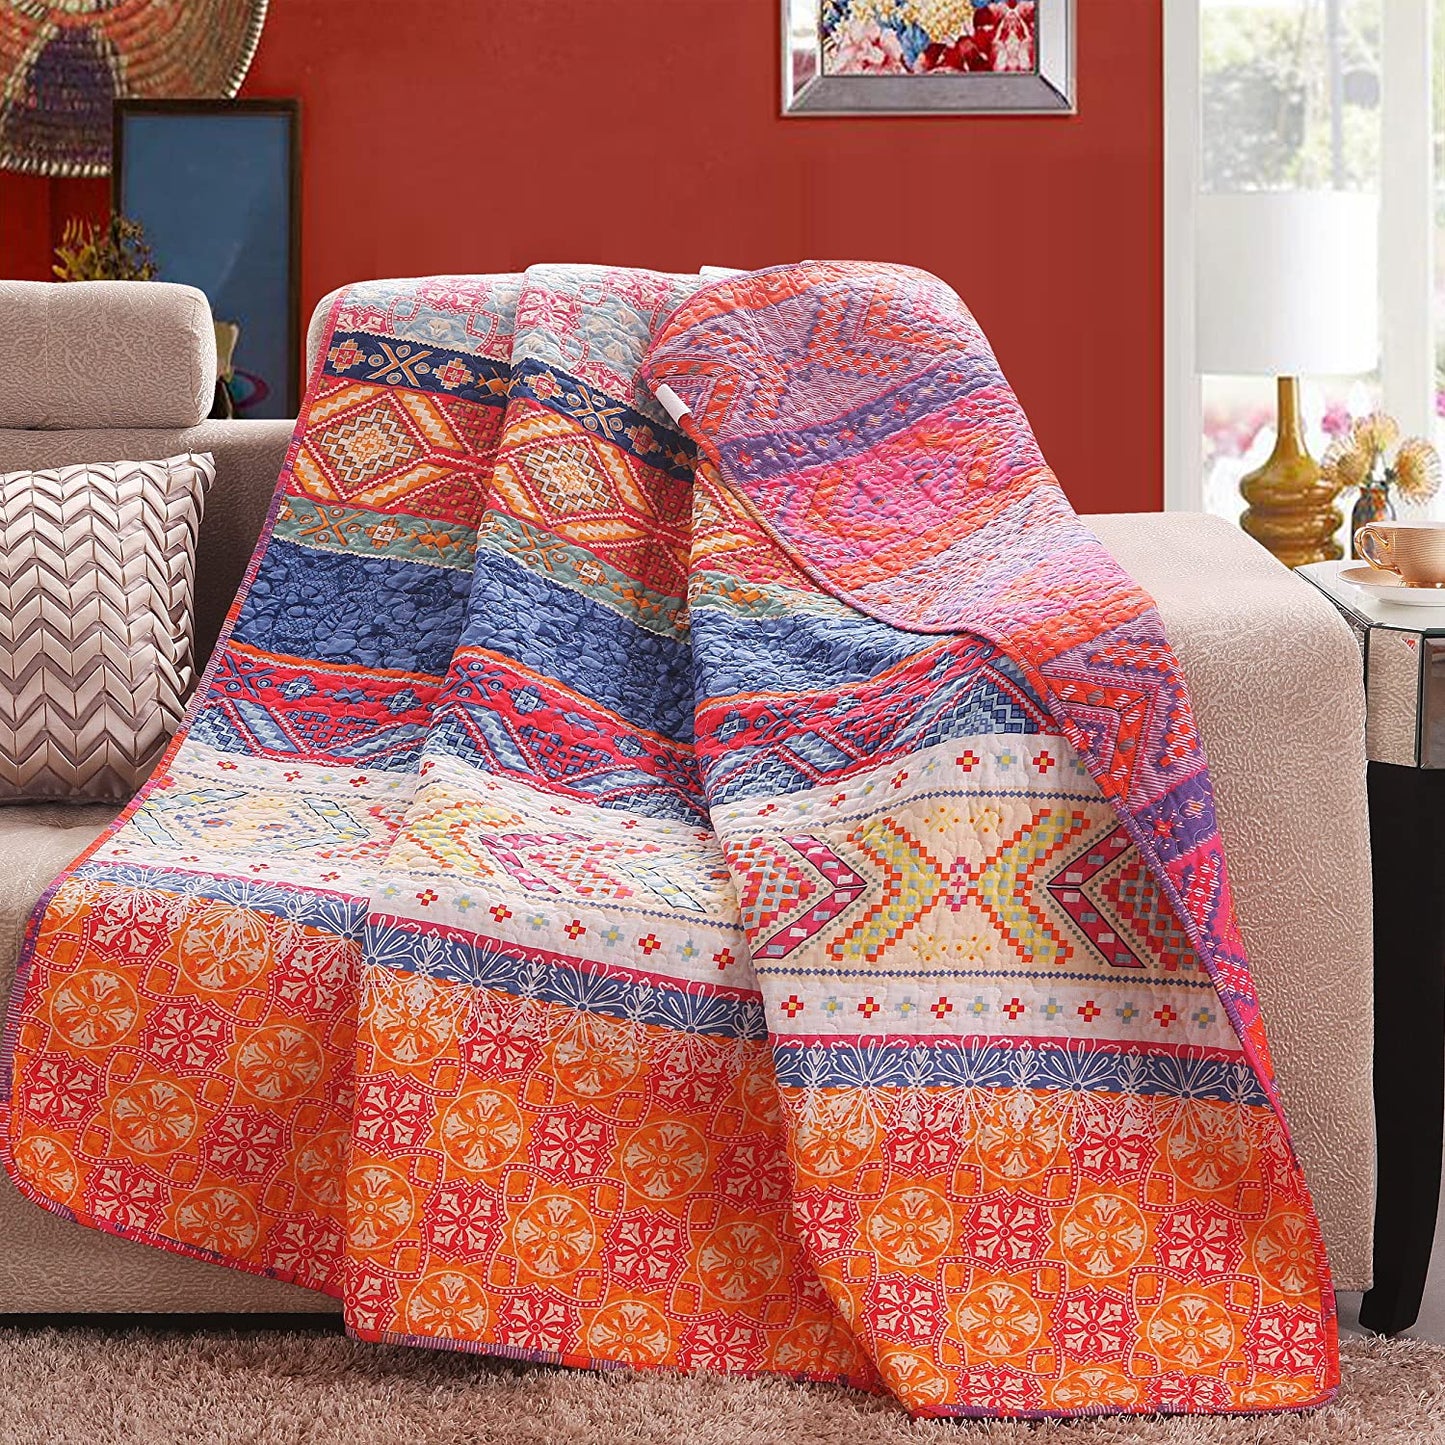 Exclusivo Mezcla Luxury Reversible 100% Cotton Multicolored Boho Stripe Quilted Throw Blanket 50x60 Inch Machine Washable and Dryable